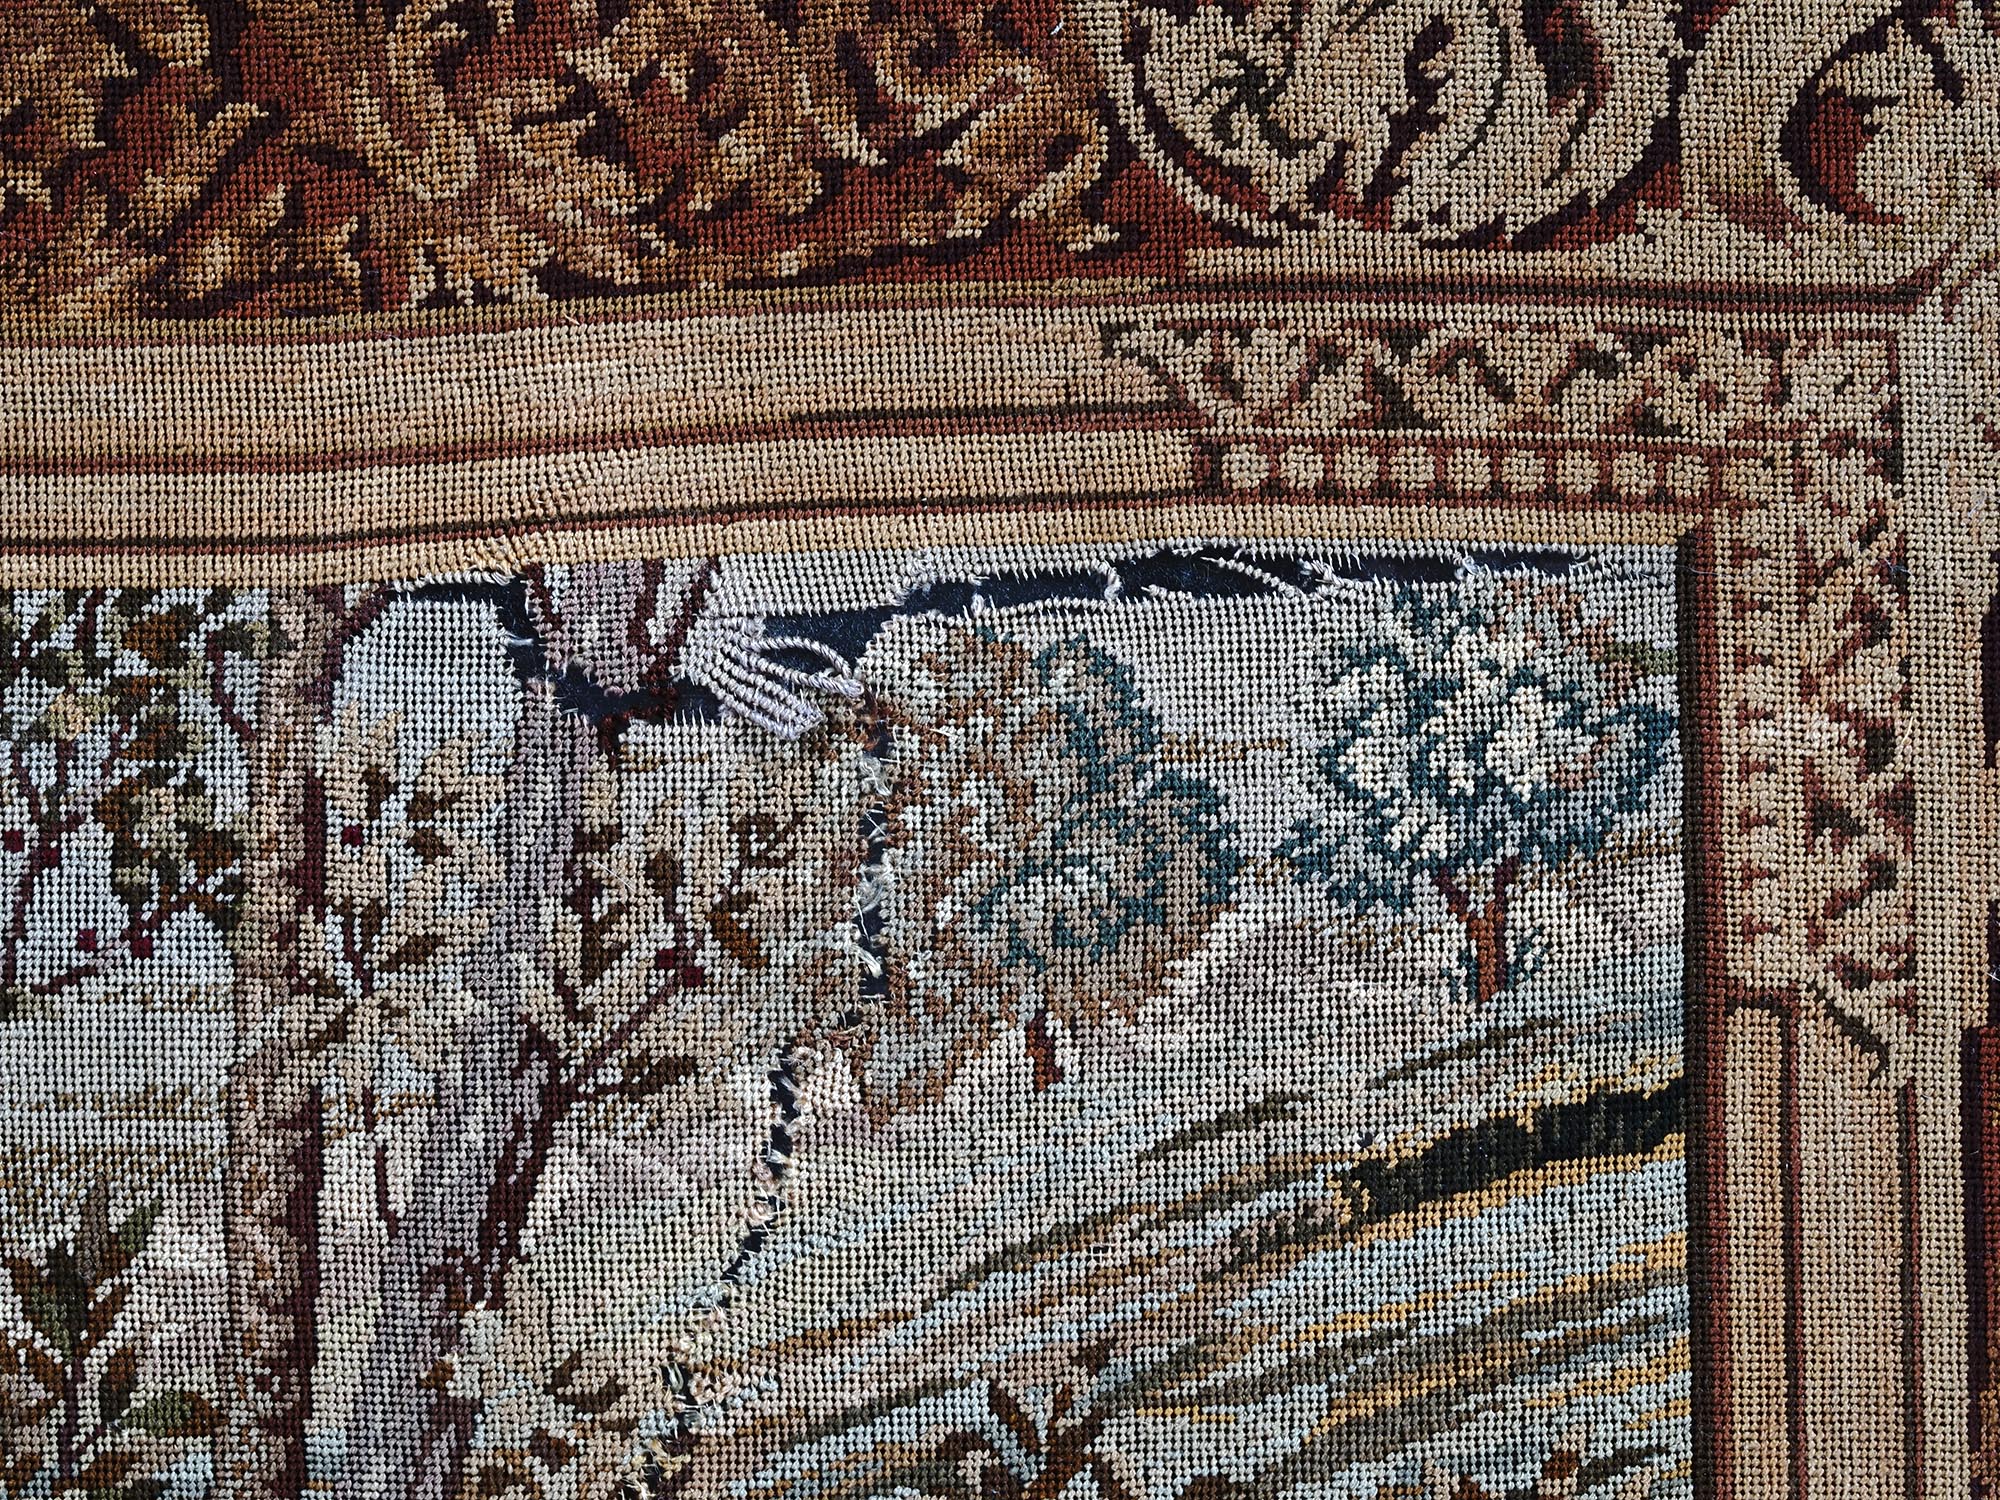 ANTIQUE NEEDLEWORK TAPESTRY GOD APOLLO AND NYMPHS PIC-4